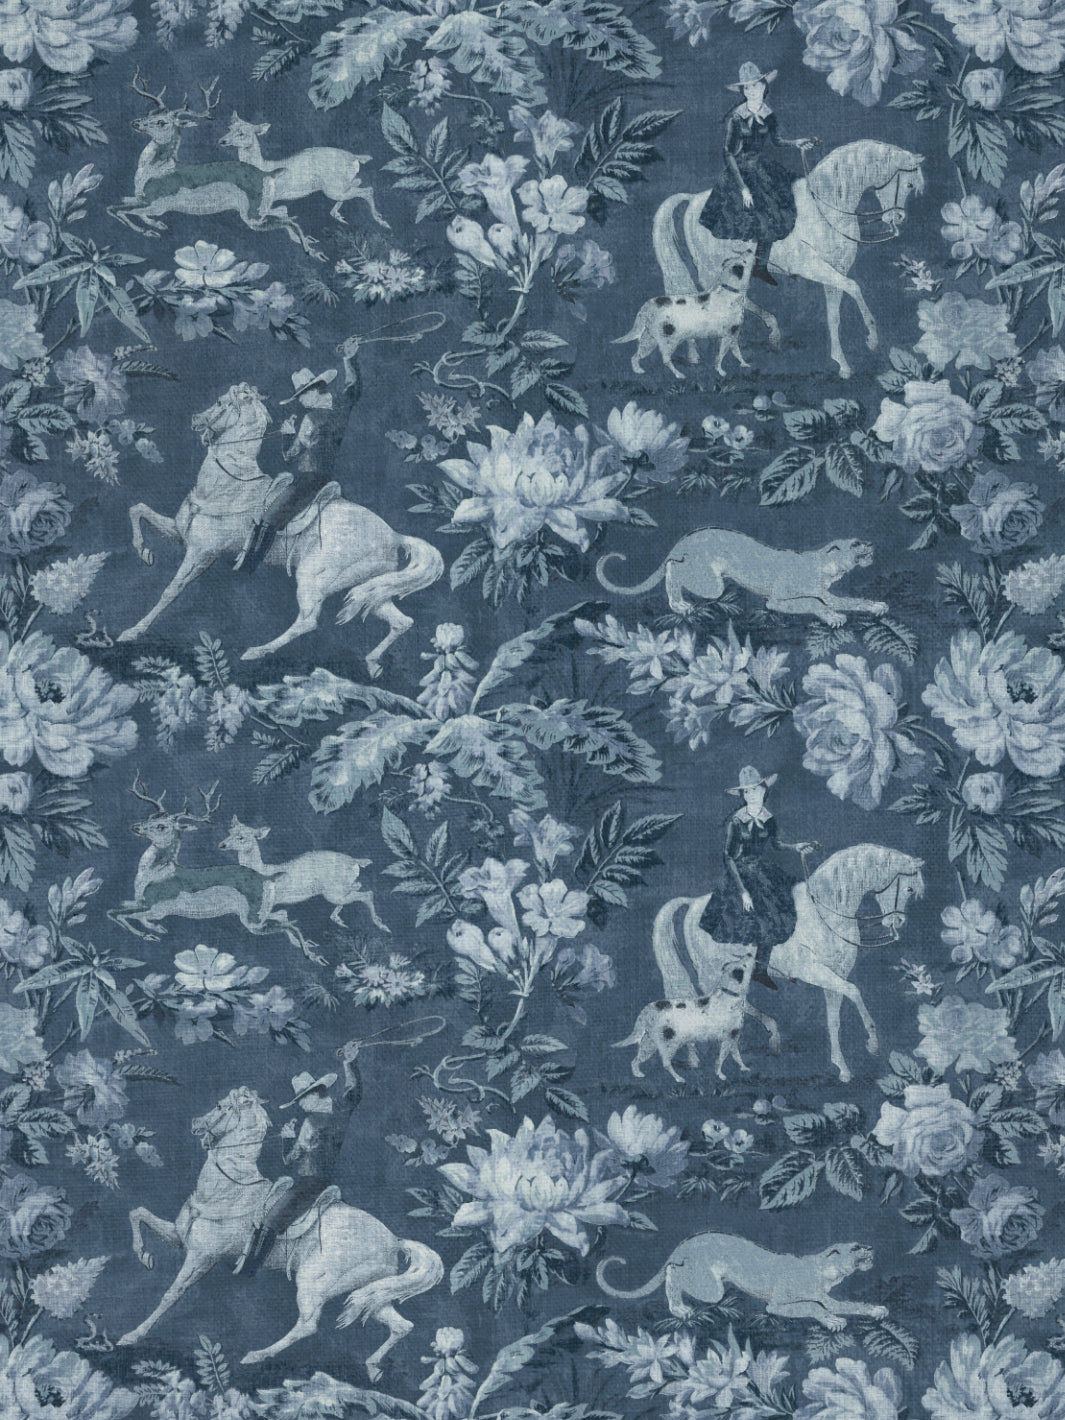 'Cowboy Toile' Linen Fabric by Nathan Turner - Blue